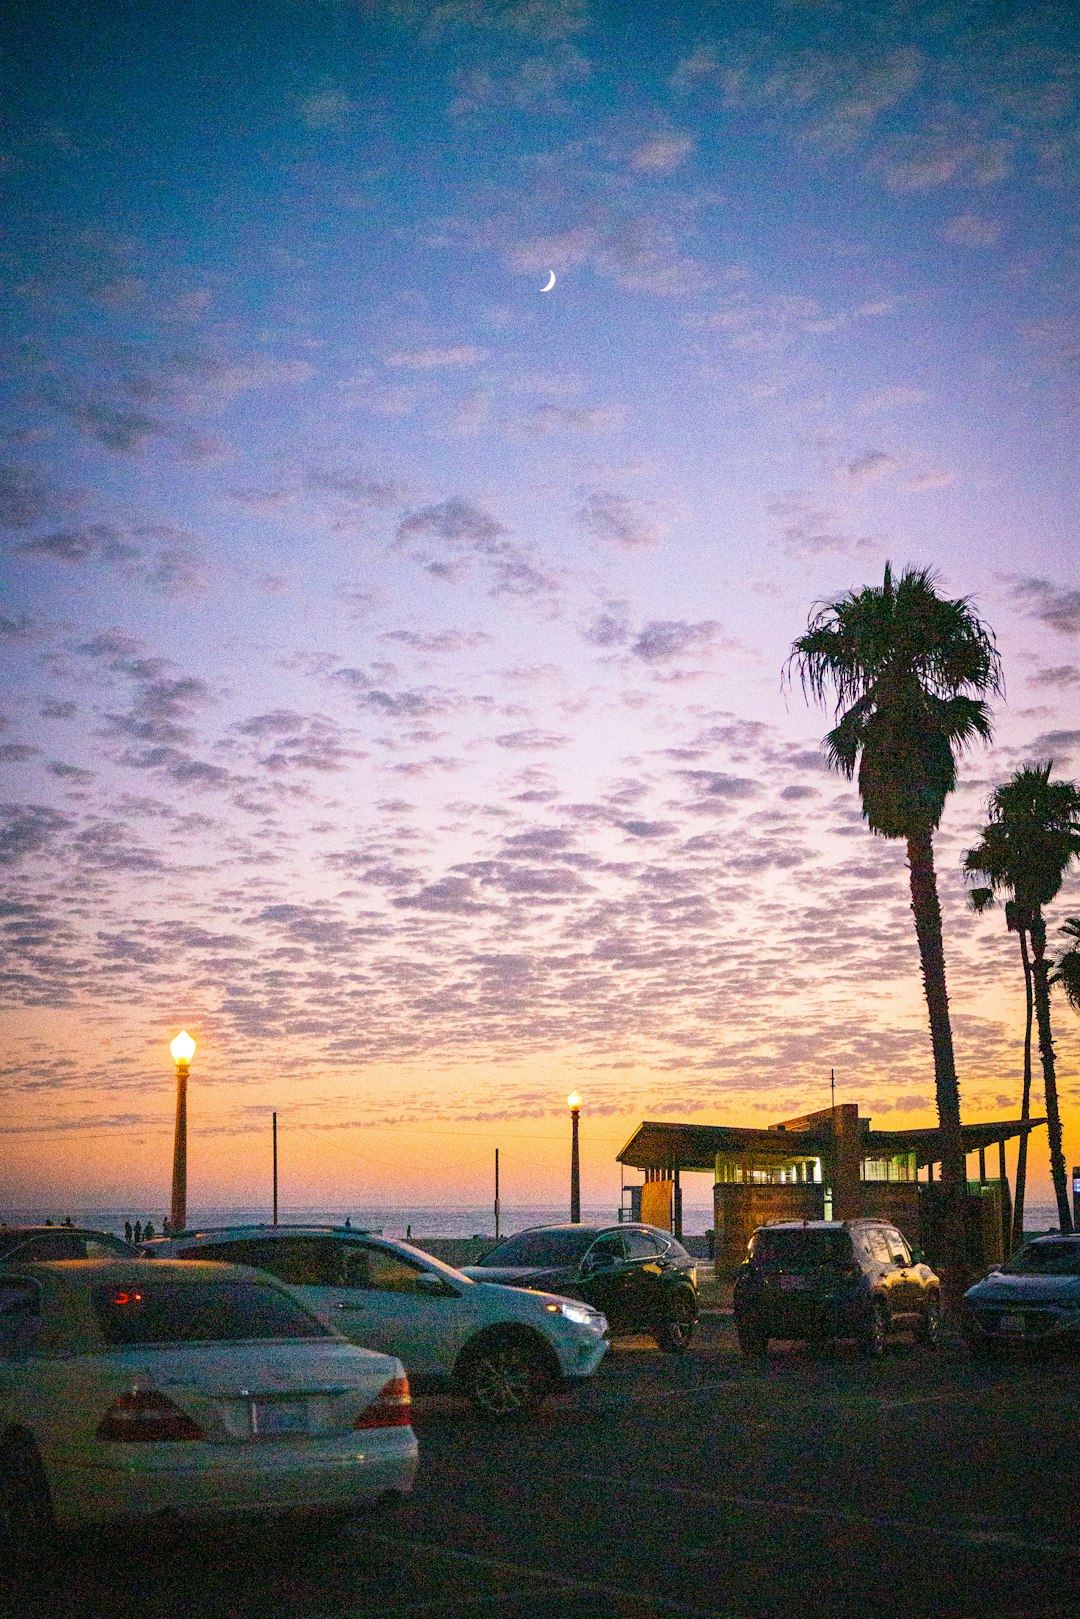 cars parked on parking lot during sunset